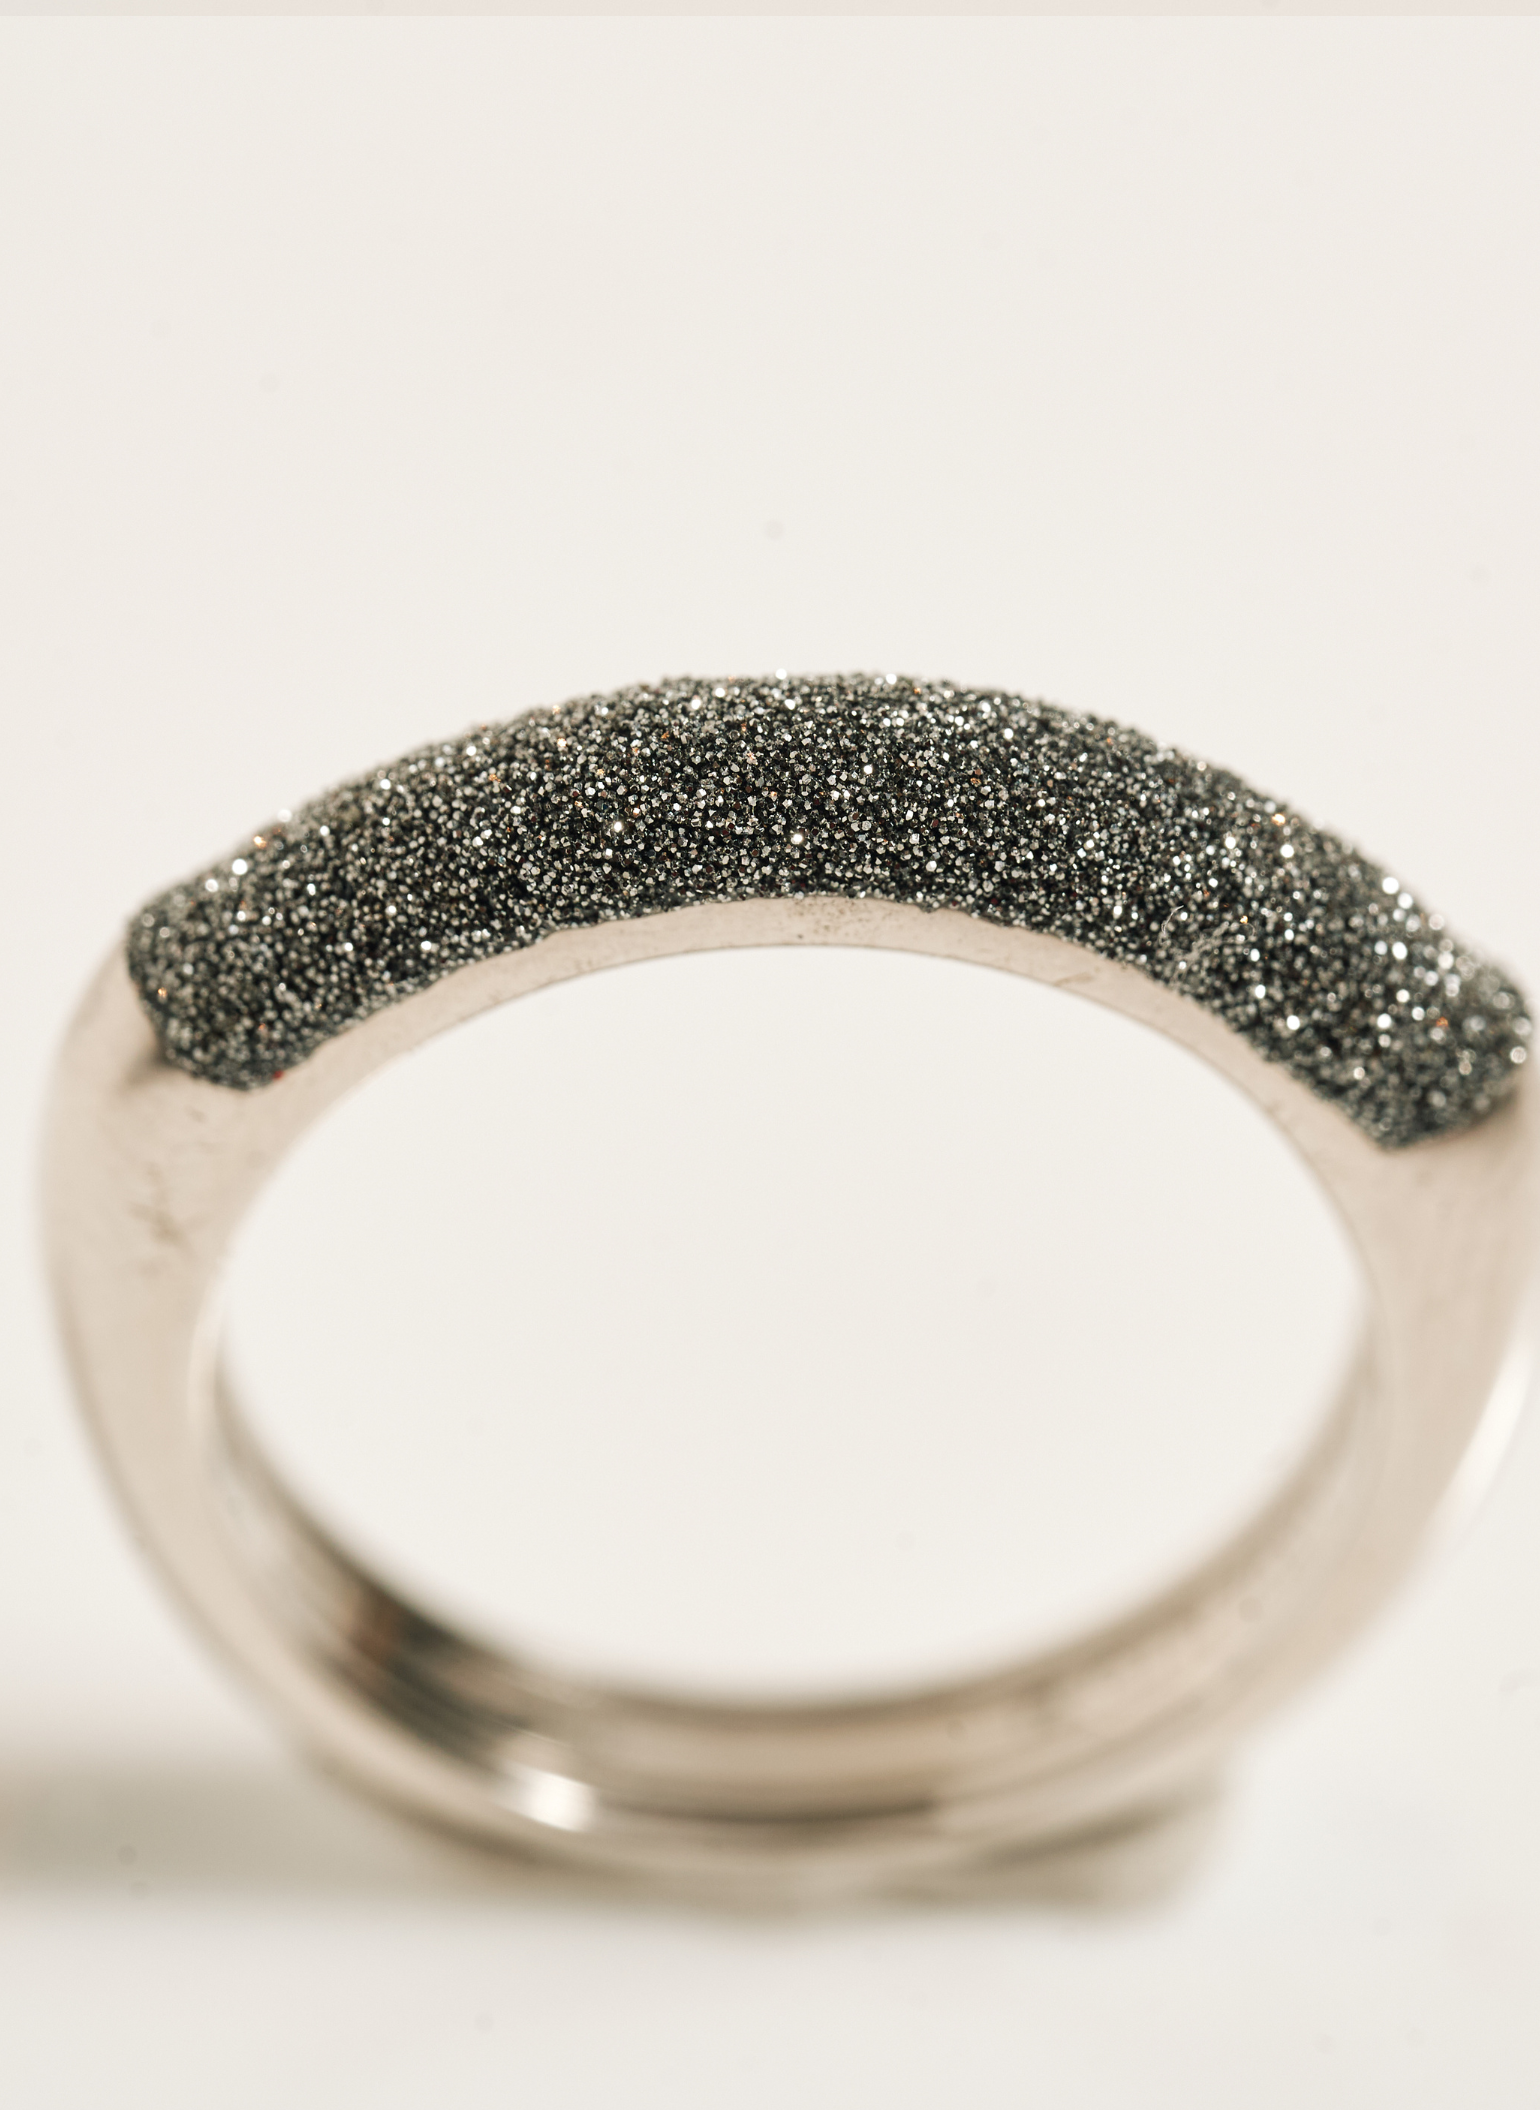 White Gold and Diamond Dust Ring